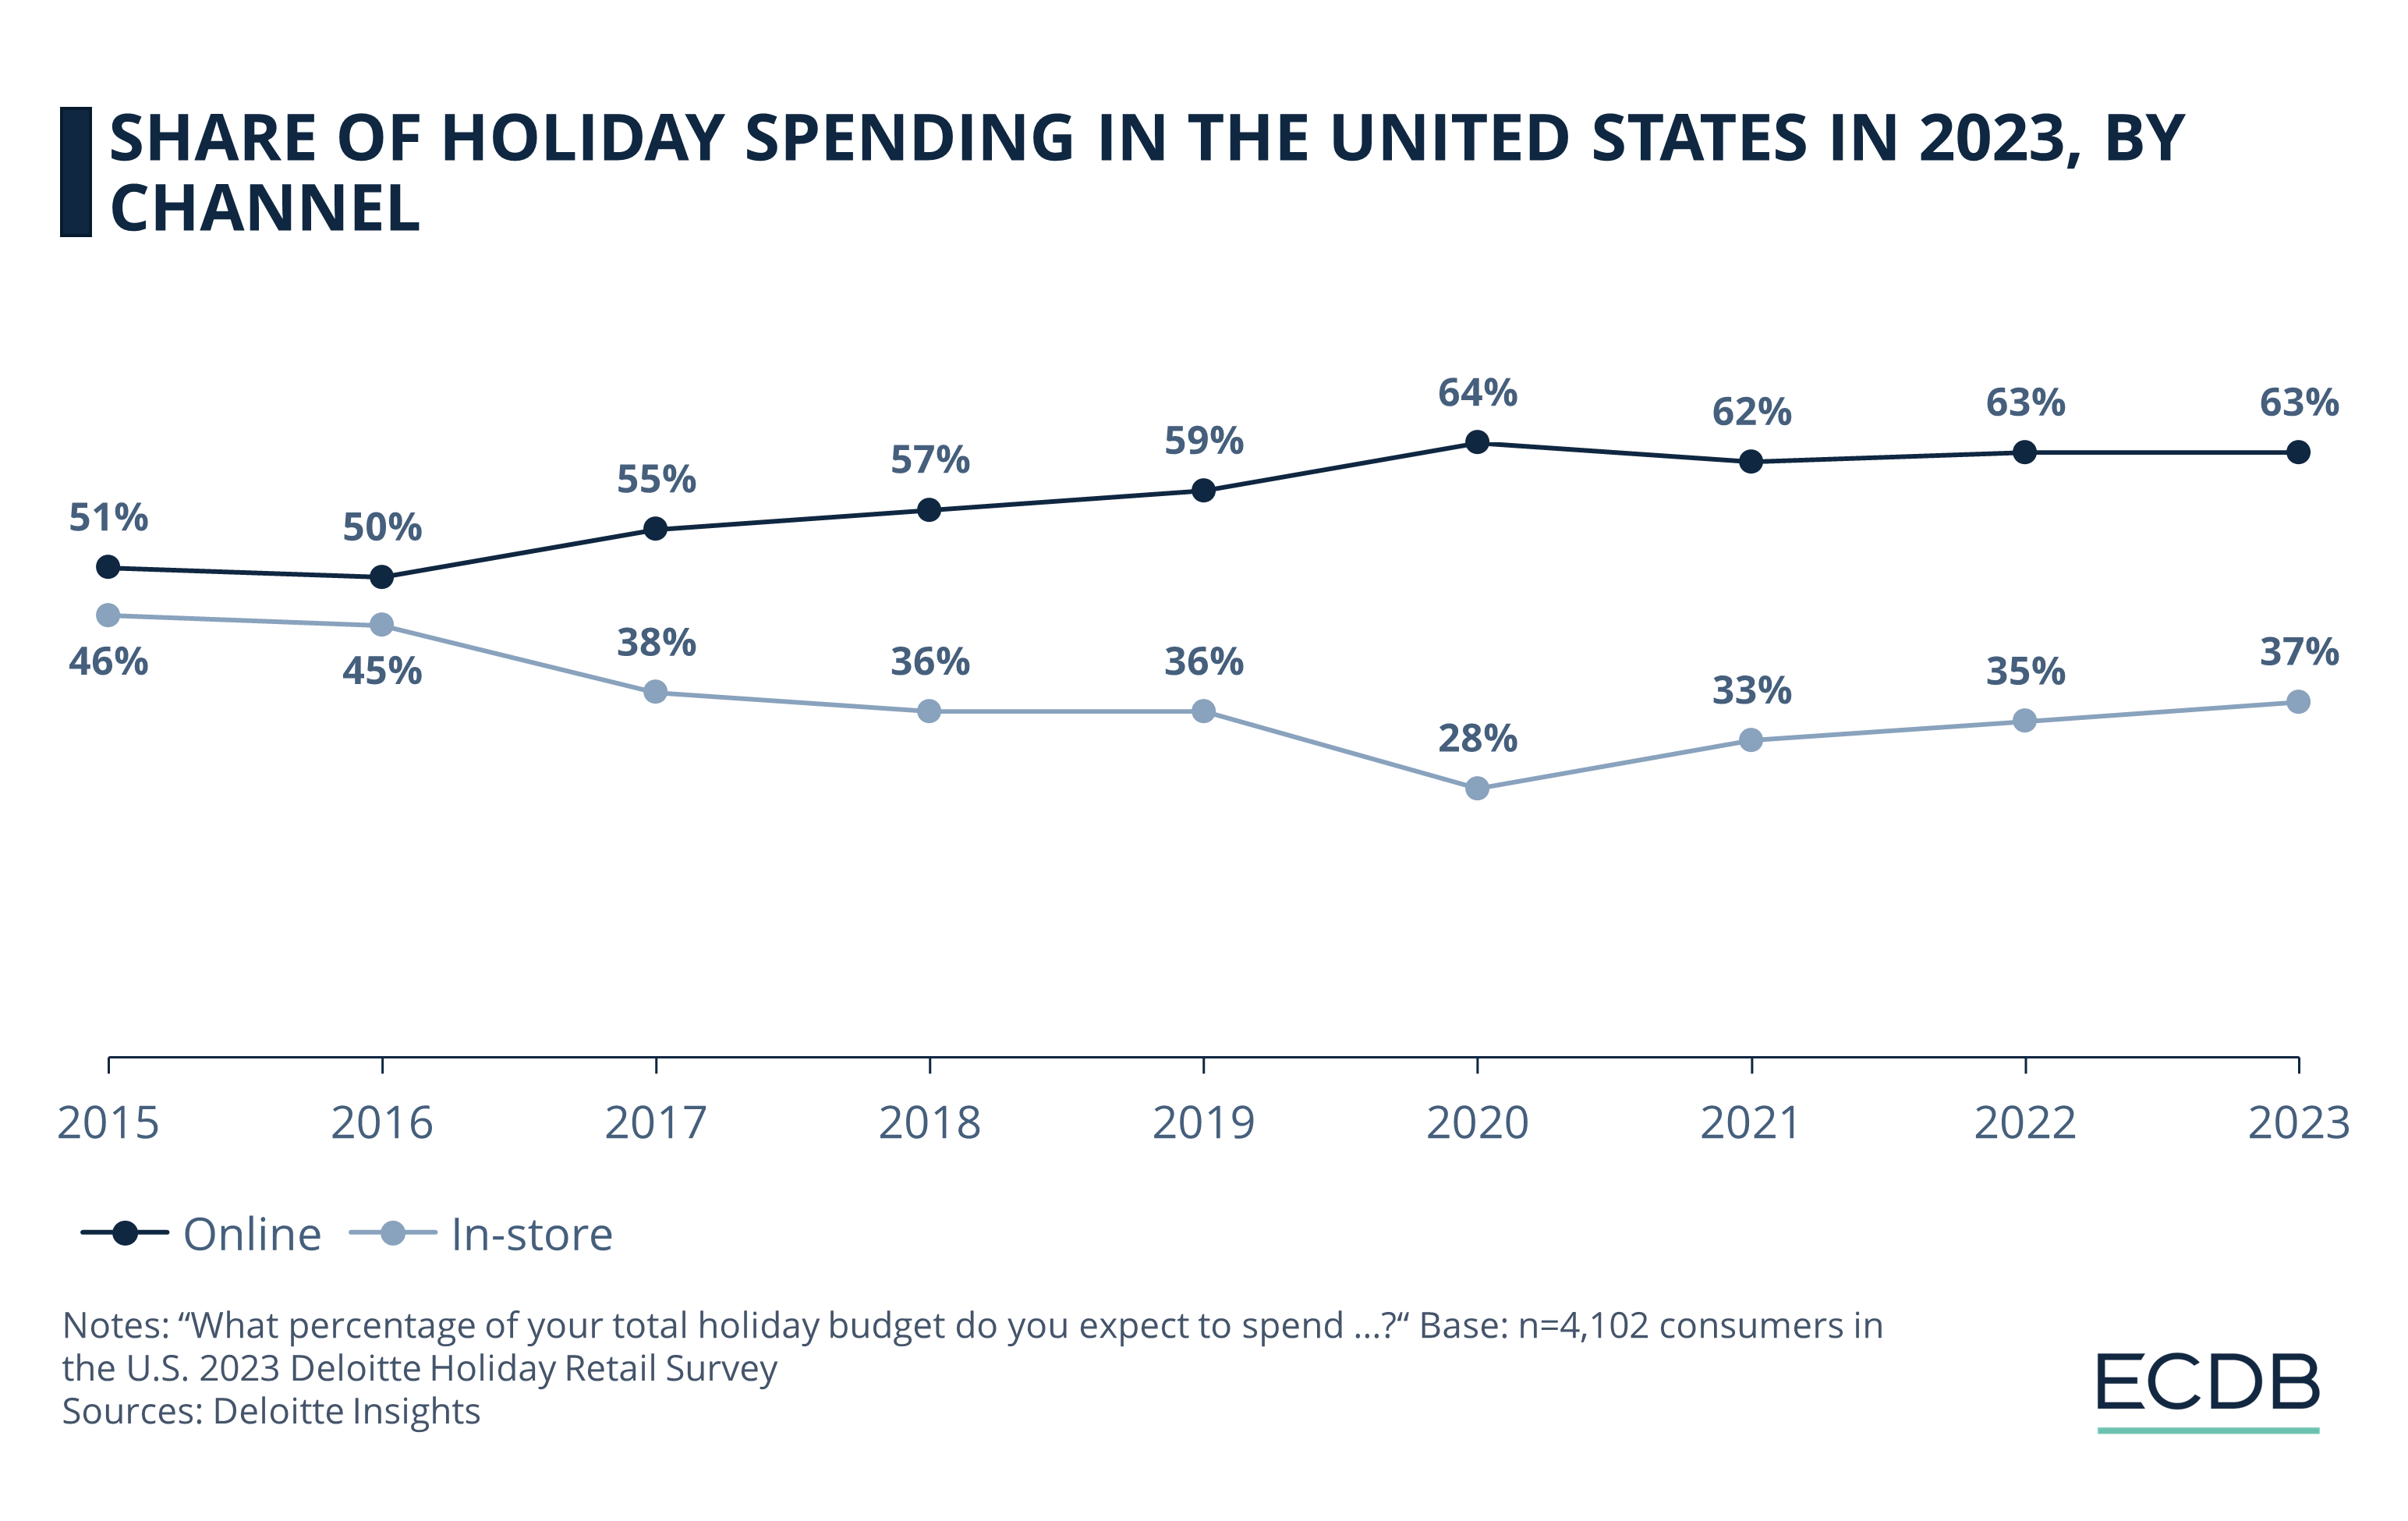 Share of Holiday Spending in the United States in 2023, by Channel